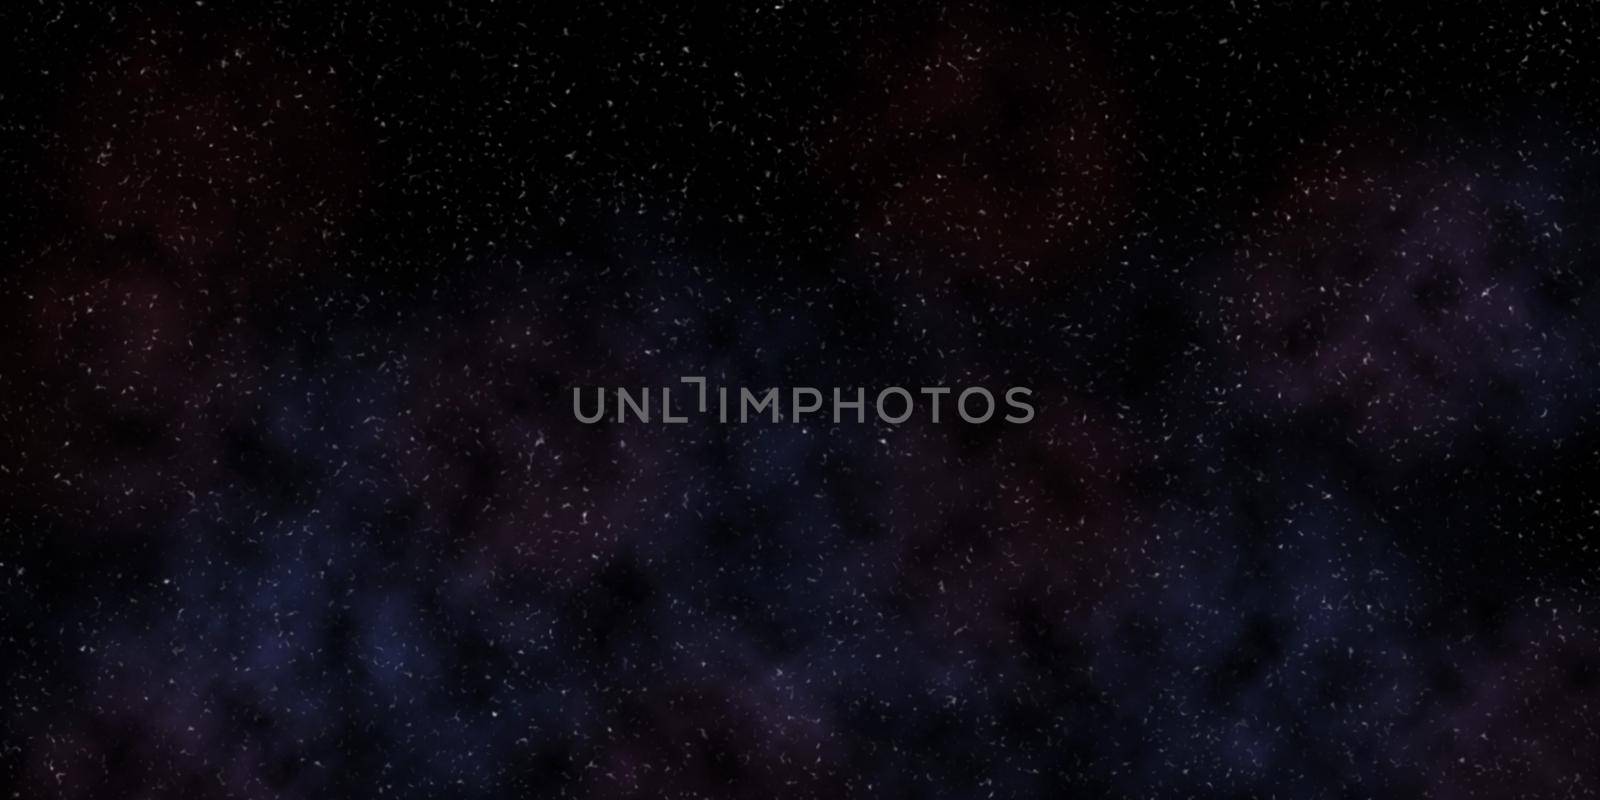 Science Fiction Outer Space Background Dramatic Galaxy